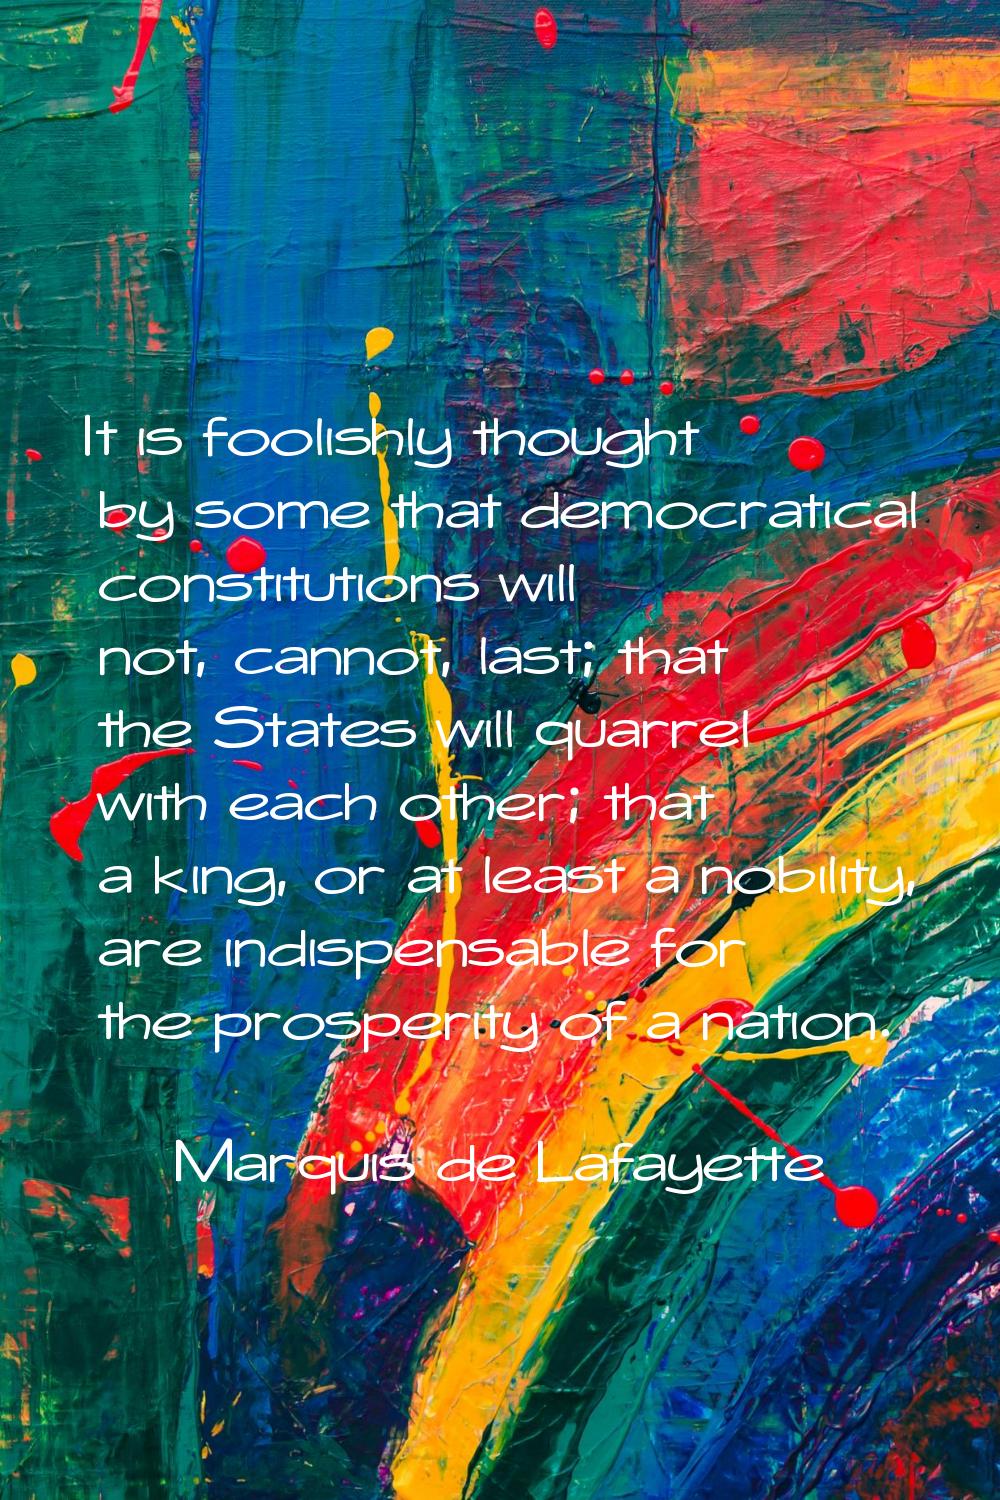 It is foolishly thought by some that democratical constitutions will not, cannot, last; that the St